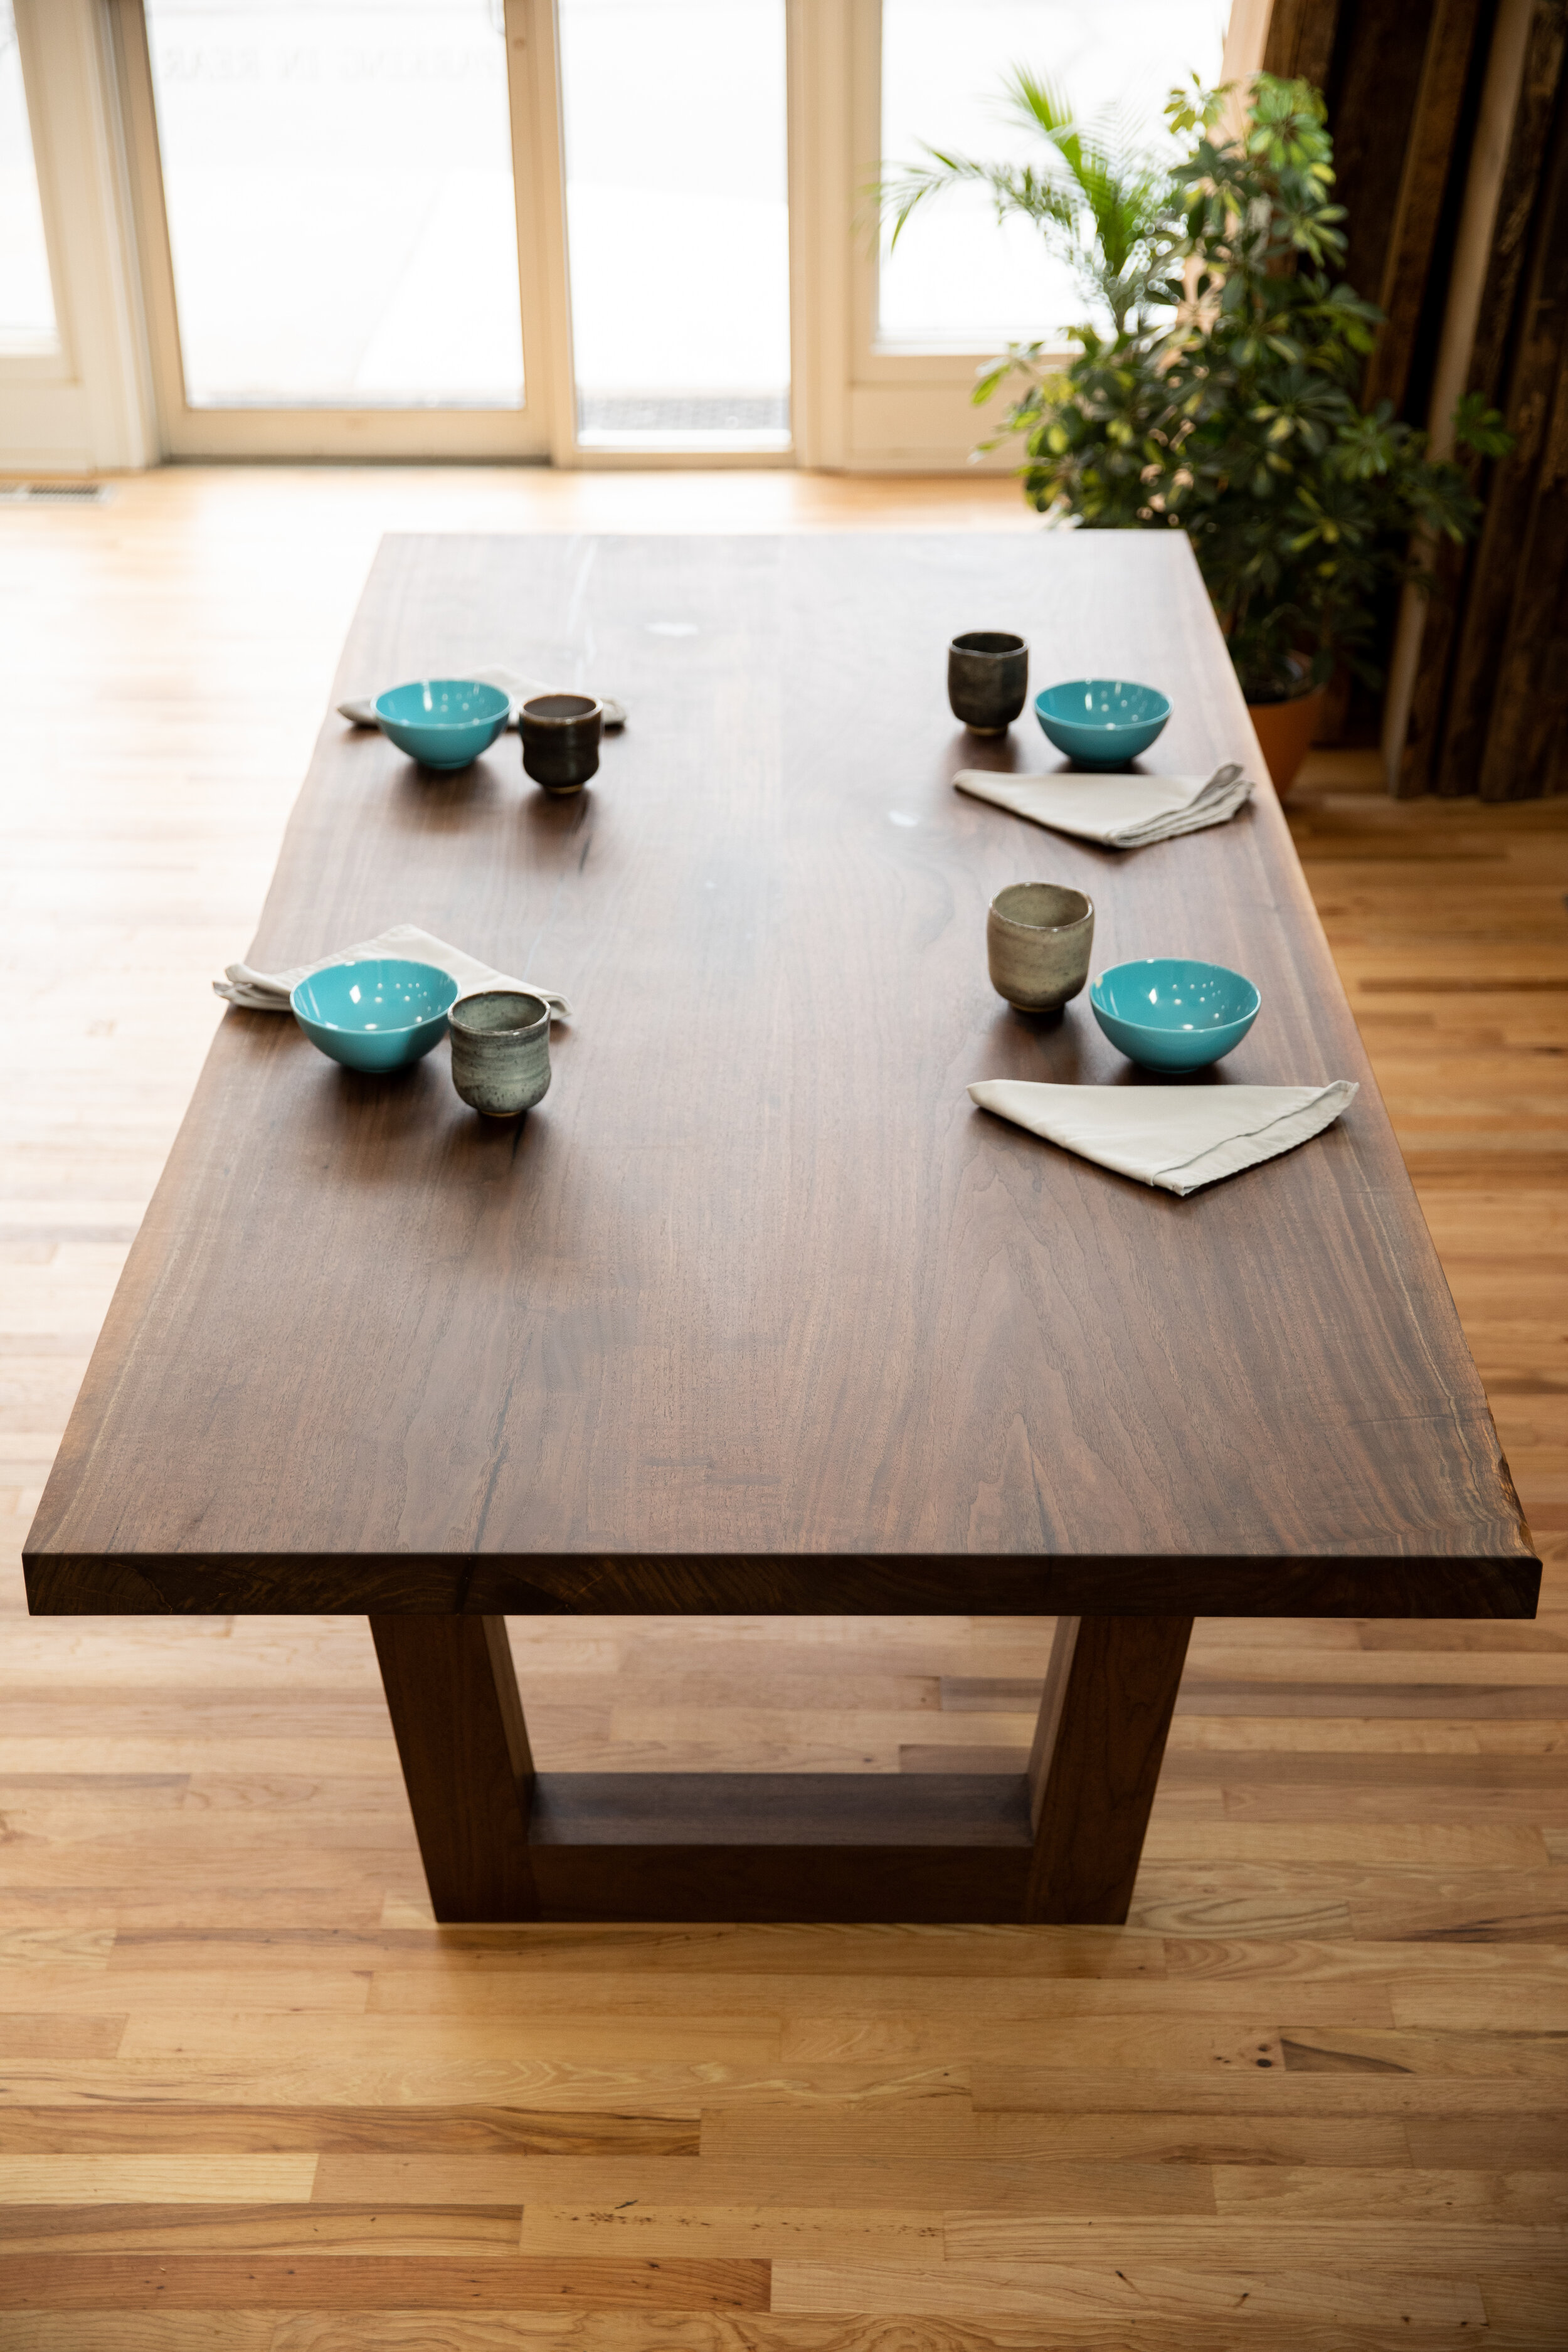 2 0 Black Walnut Dining Table, Dining Room Tables Indianapolis